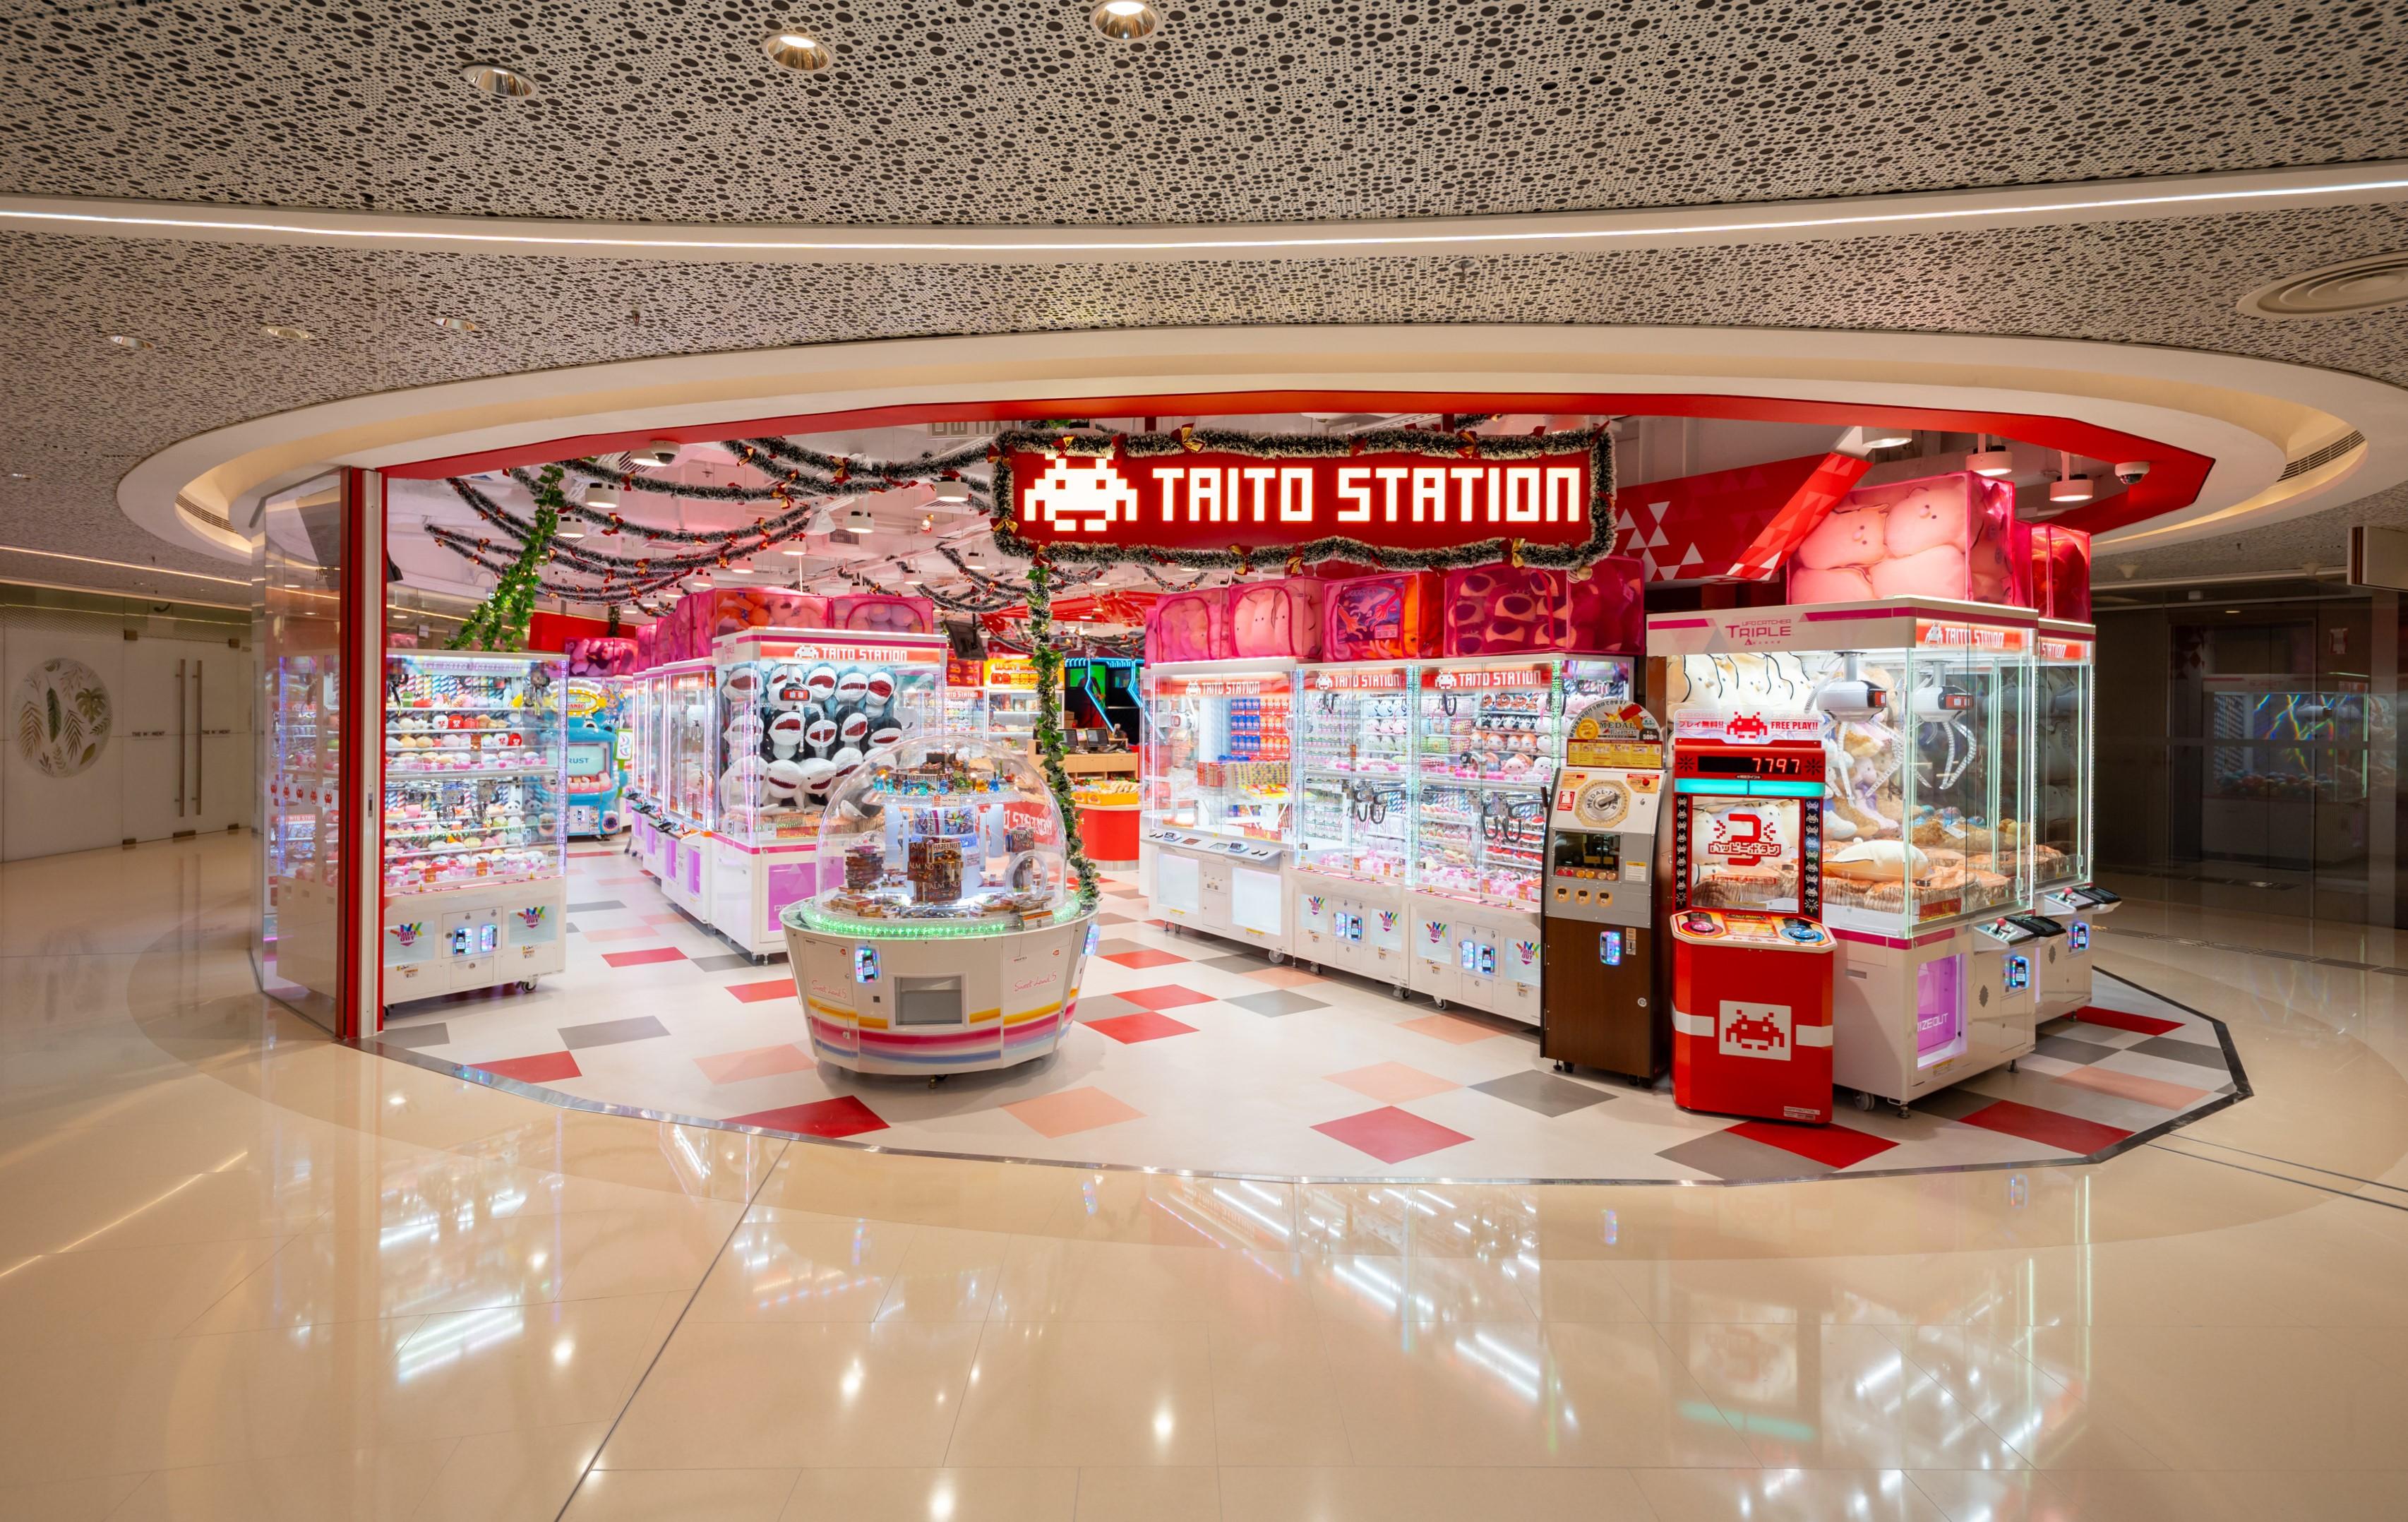 Invest Hong Kong announced today (December 14) that it has supported a Japanese company, TAITO CORPORATION, to open its first franchised outlet, TAITO STATION, in Hong Kong. Photo shows its first outlet in Tsuen Wan.

